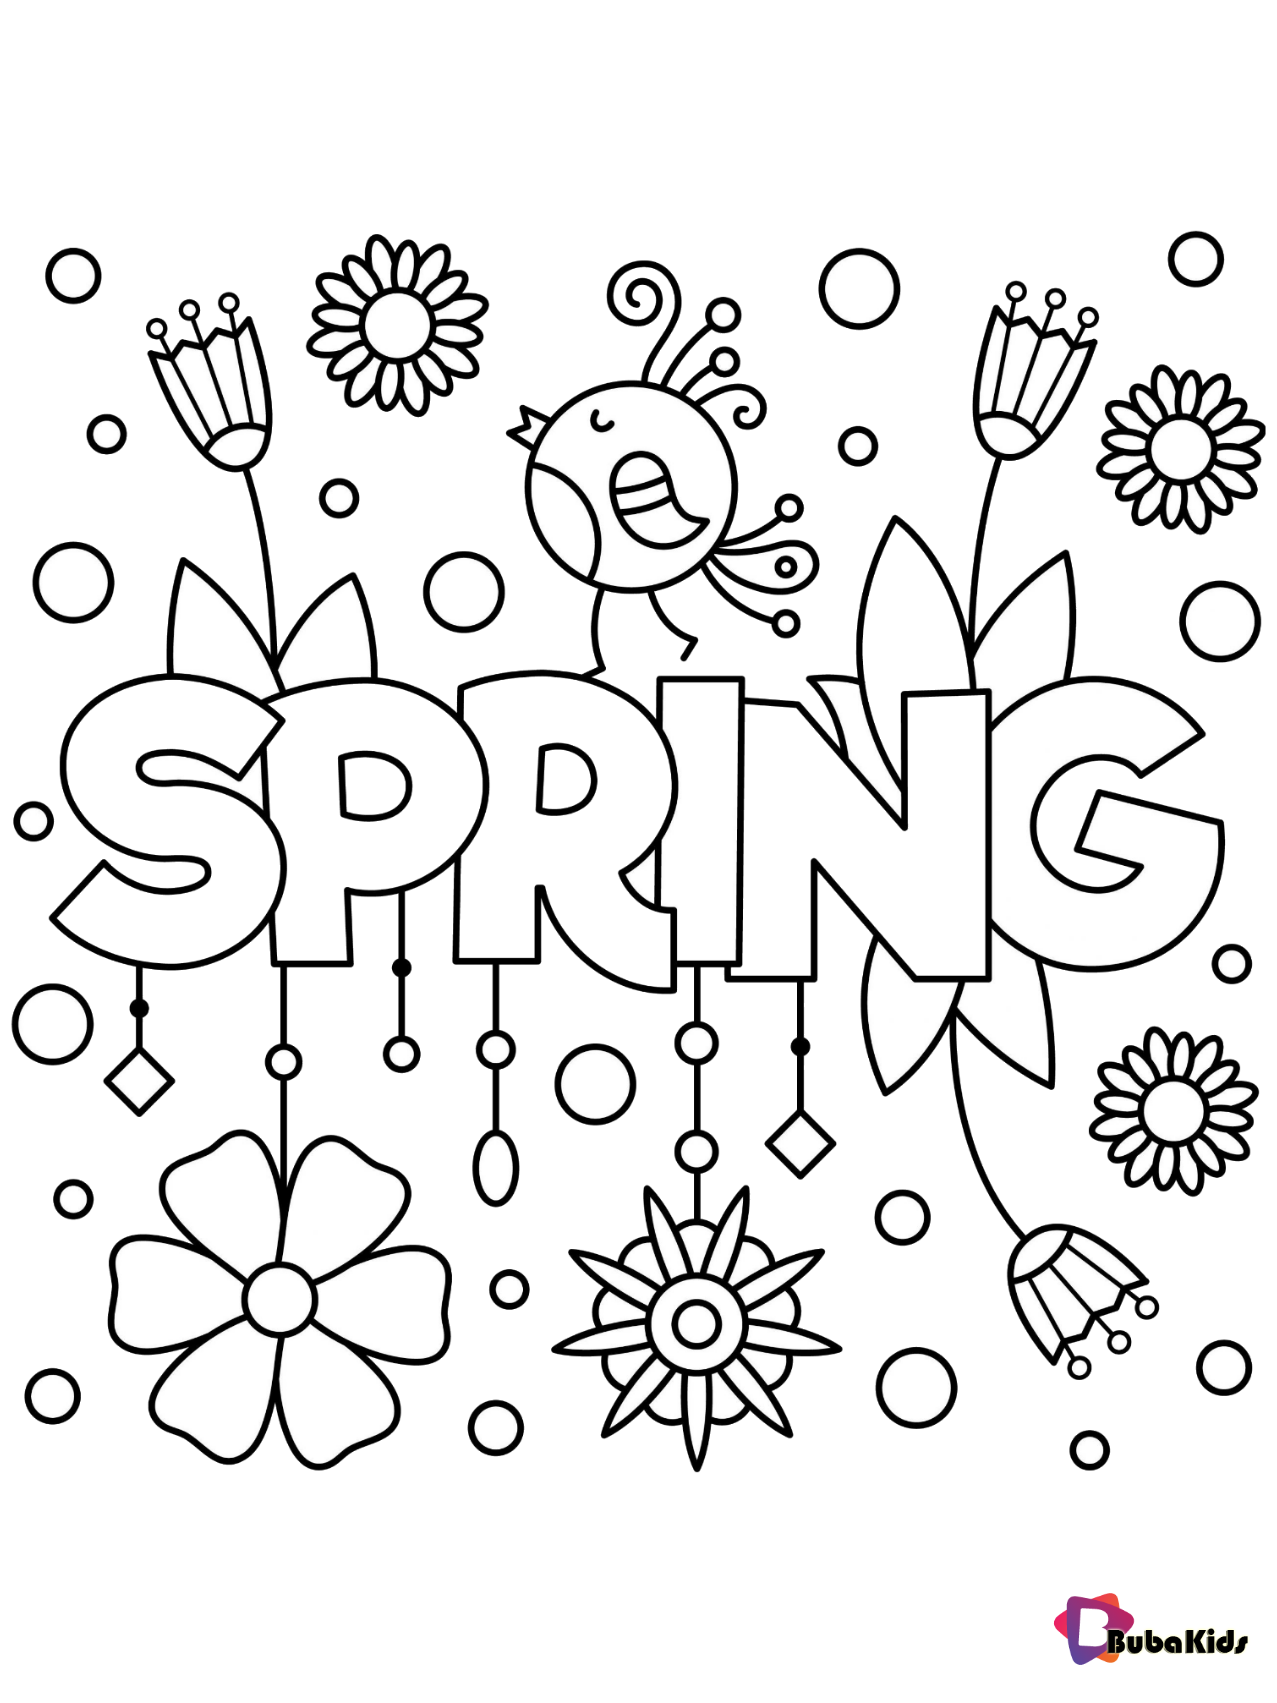 Spring time coloring page for kids Wallpaper